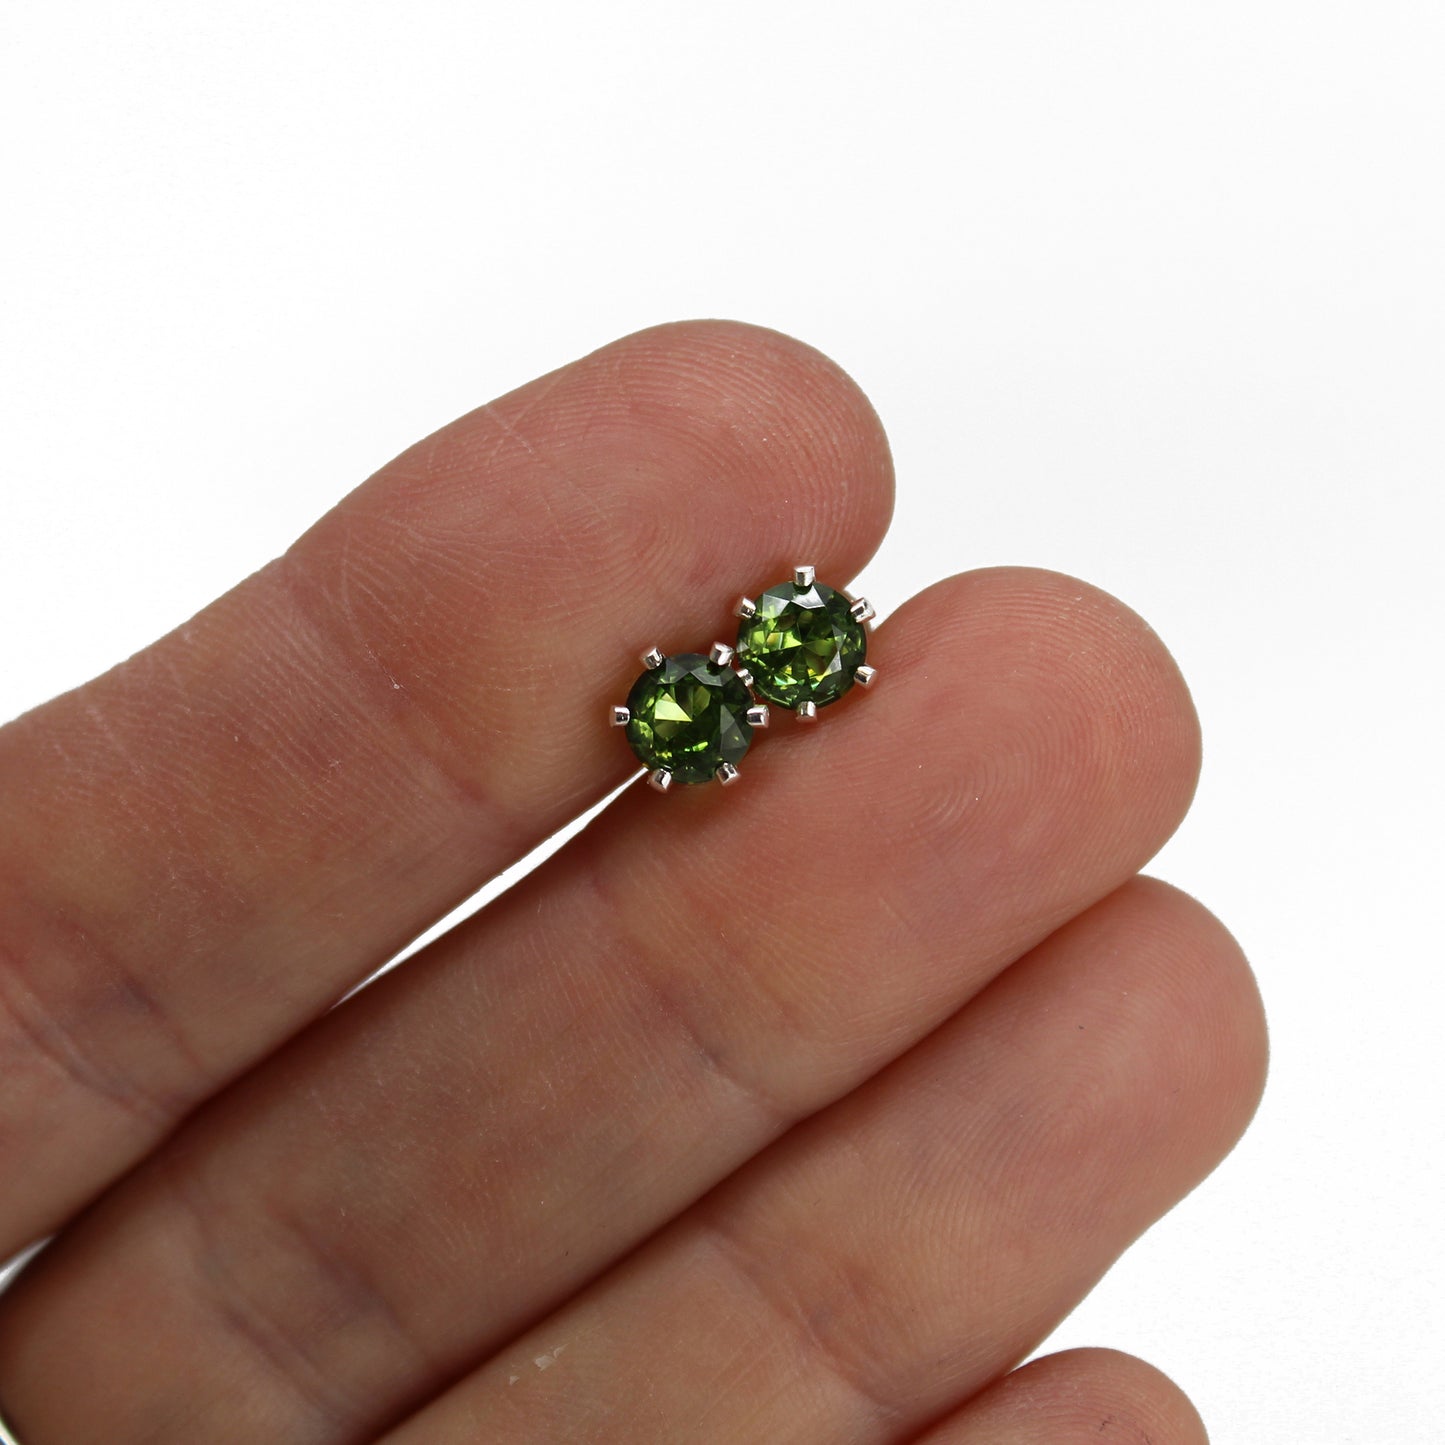 6mm Prong Set Simulated Peridot Stud Earrings in Sterling Silver